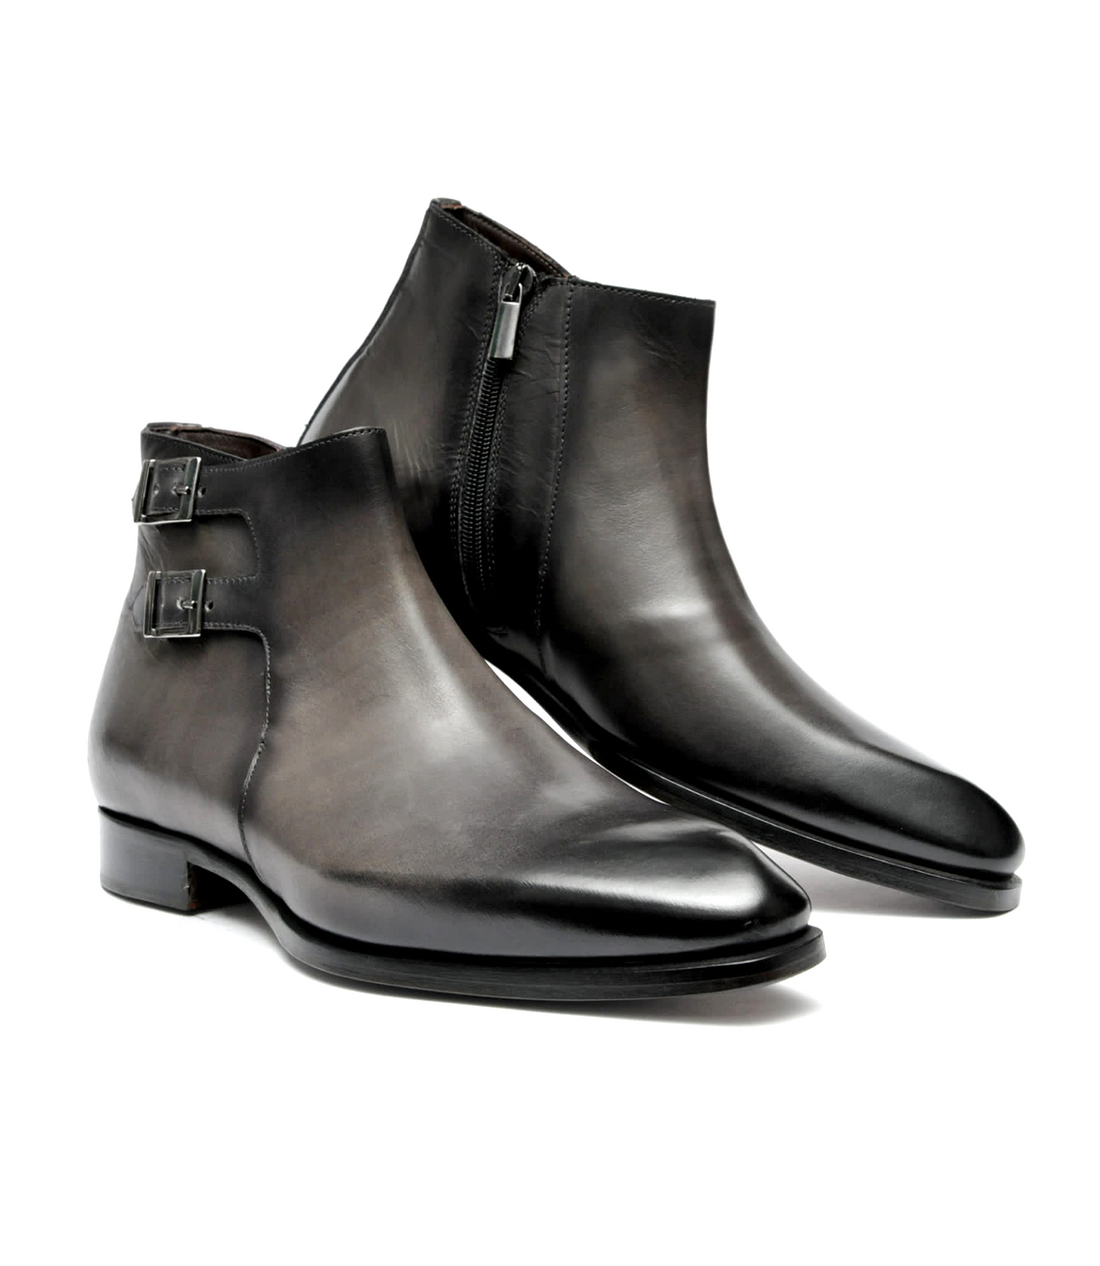 FILANGIERI - STAINED GREY LEATHER ANKLE BOOT WITH DOUBLE MONK & ZIPPER